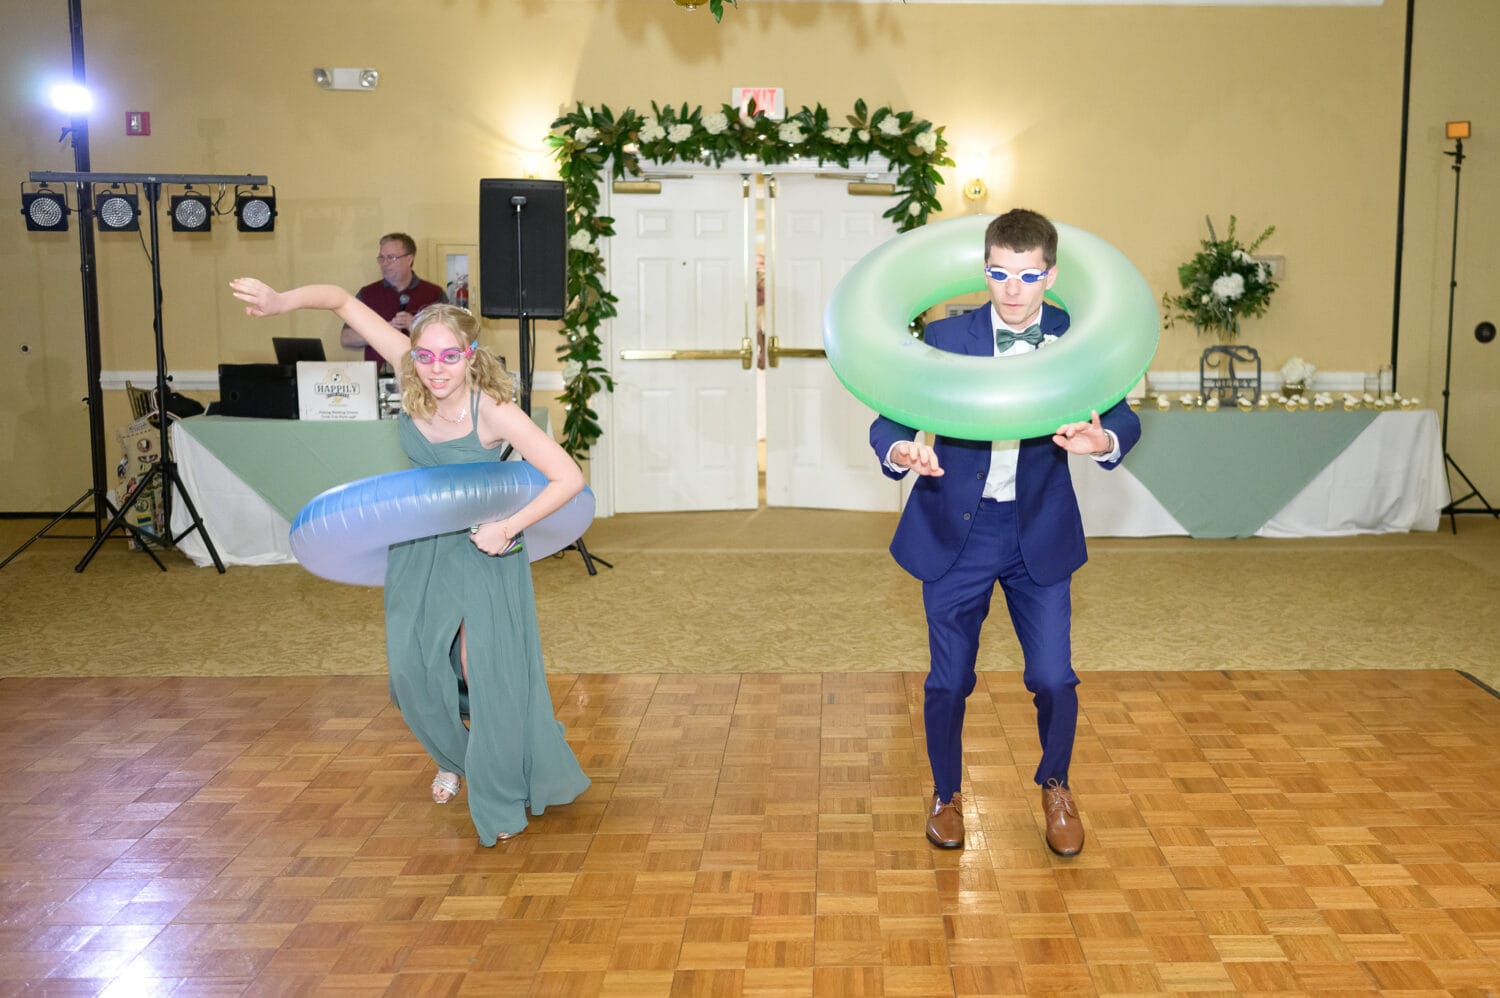 Having fun with wedding party introductions - Pawleys Plantation Golf & Country Club